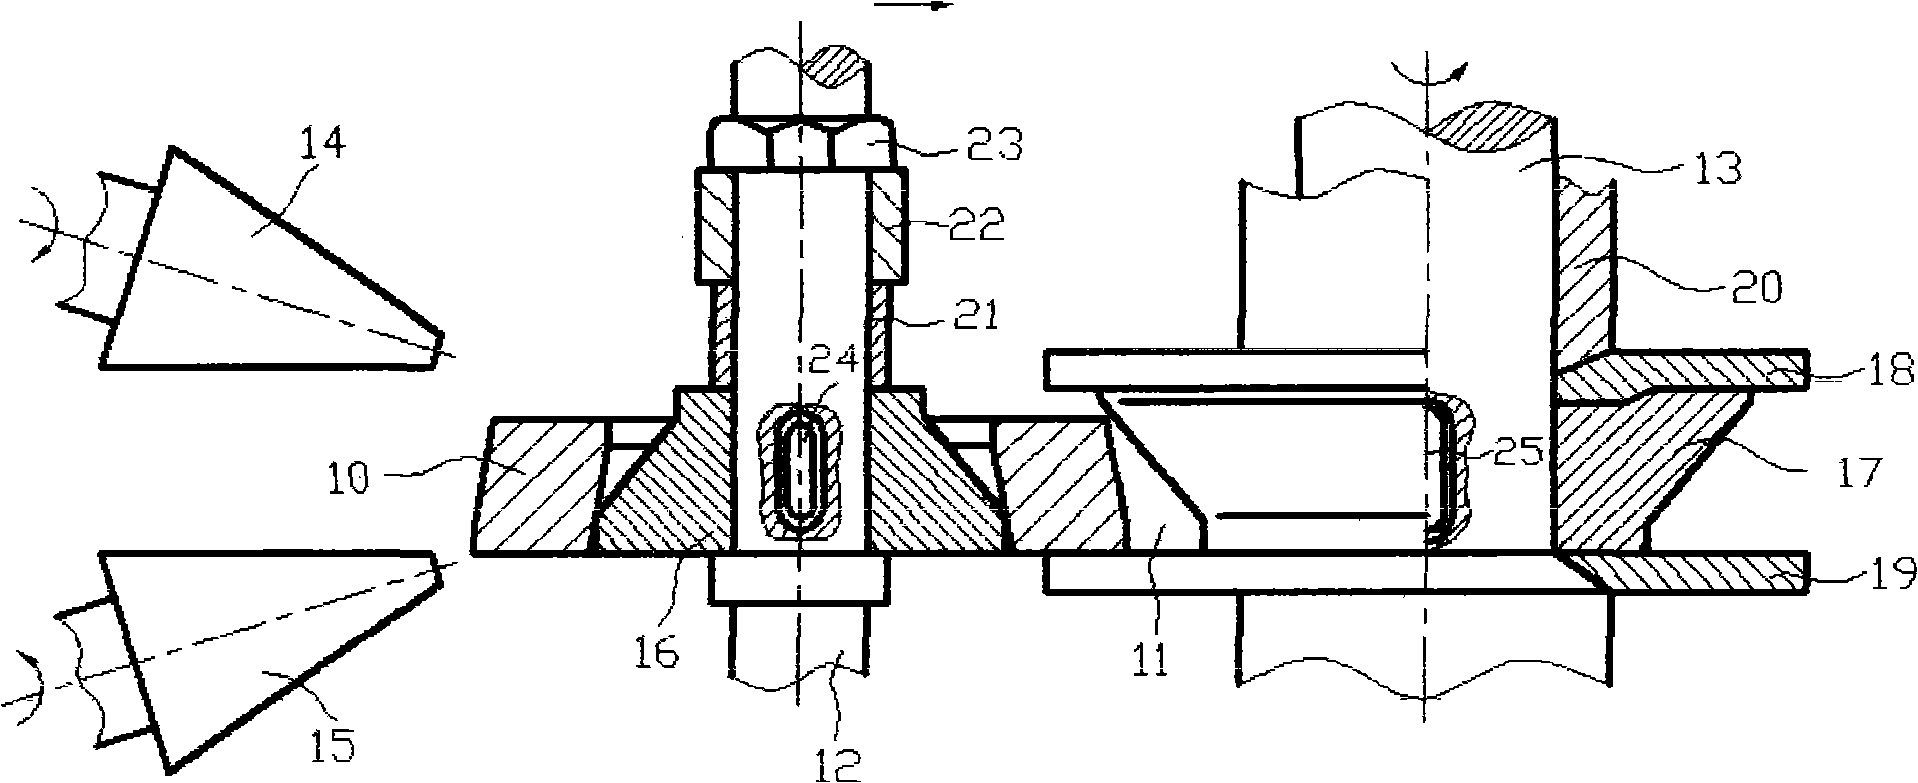 Method for rolling and shaping stainless steel conical ring